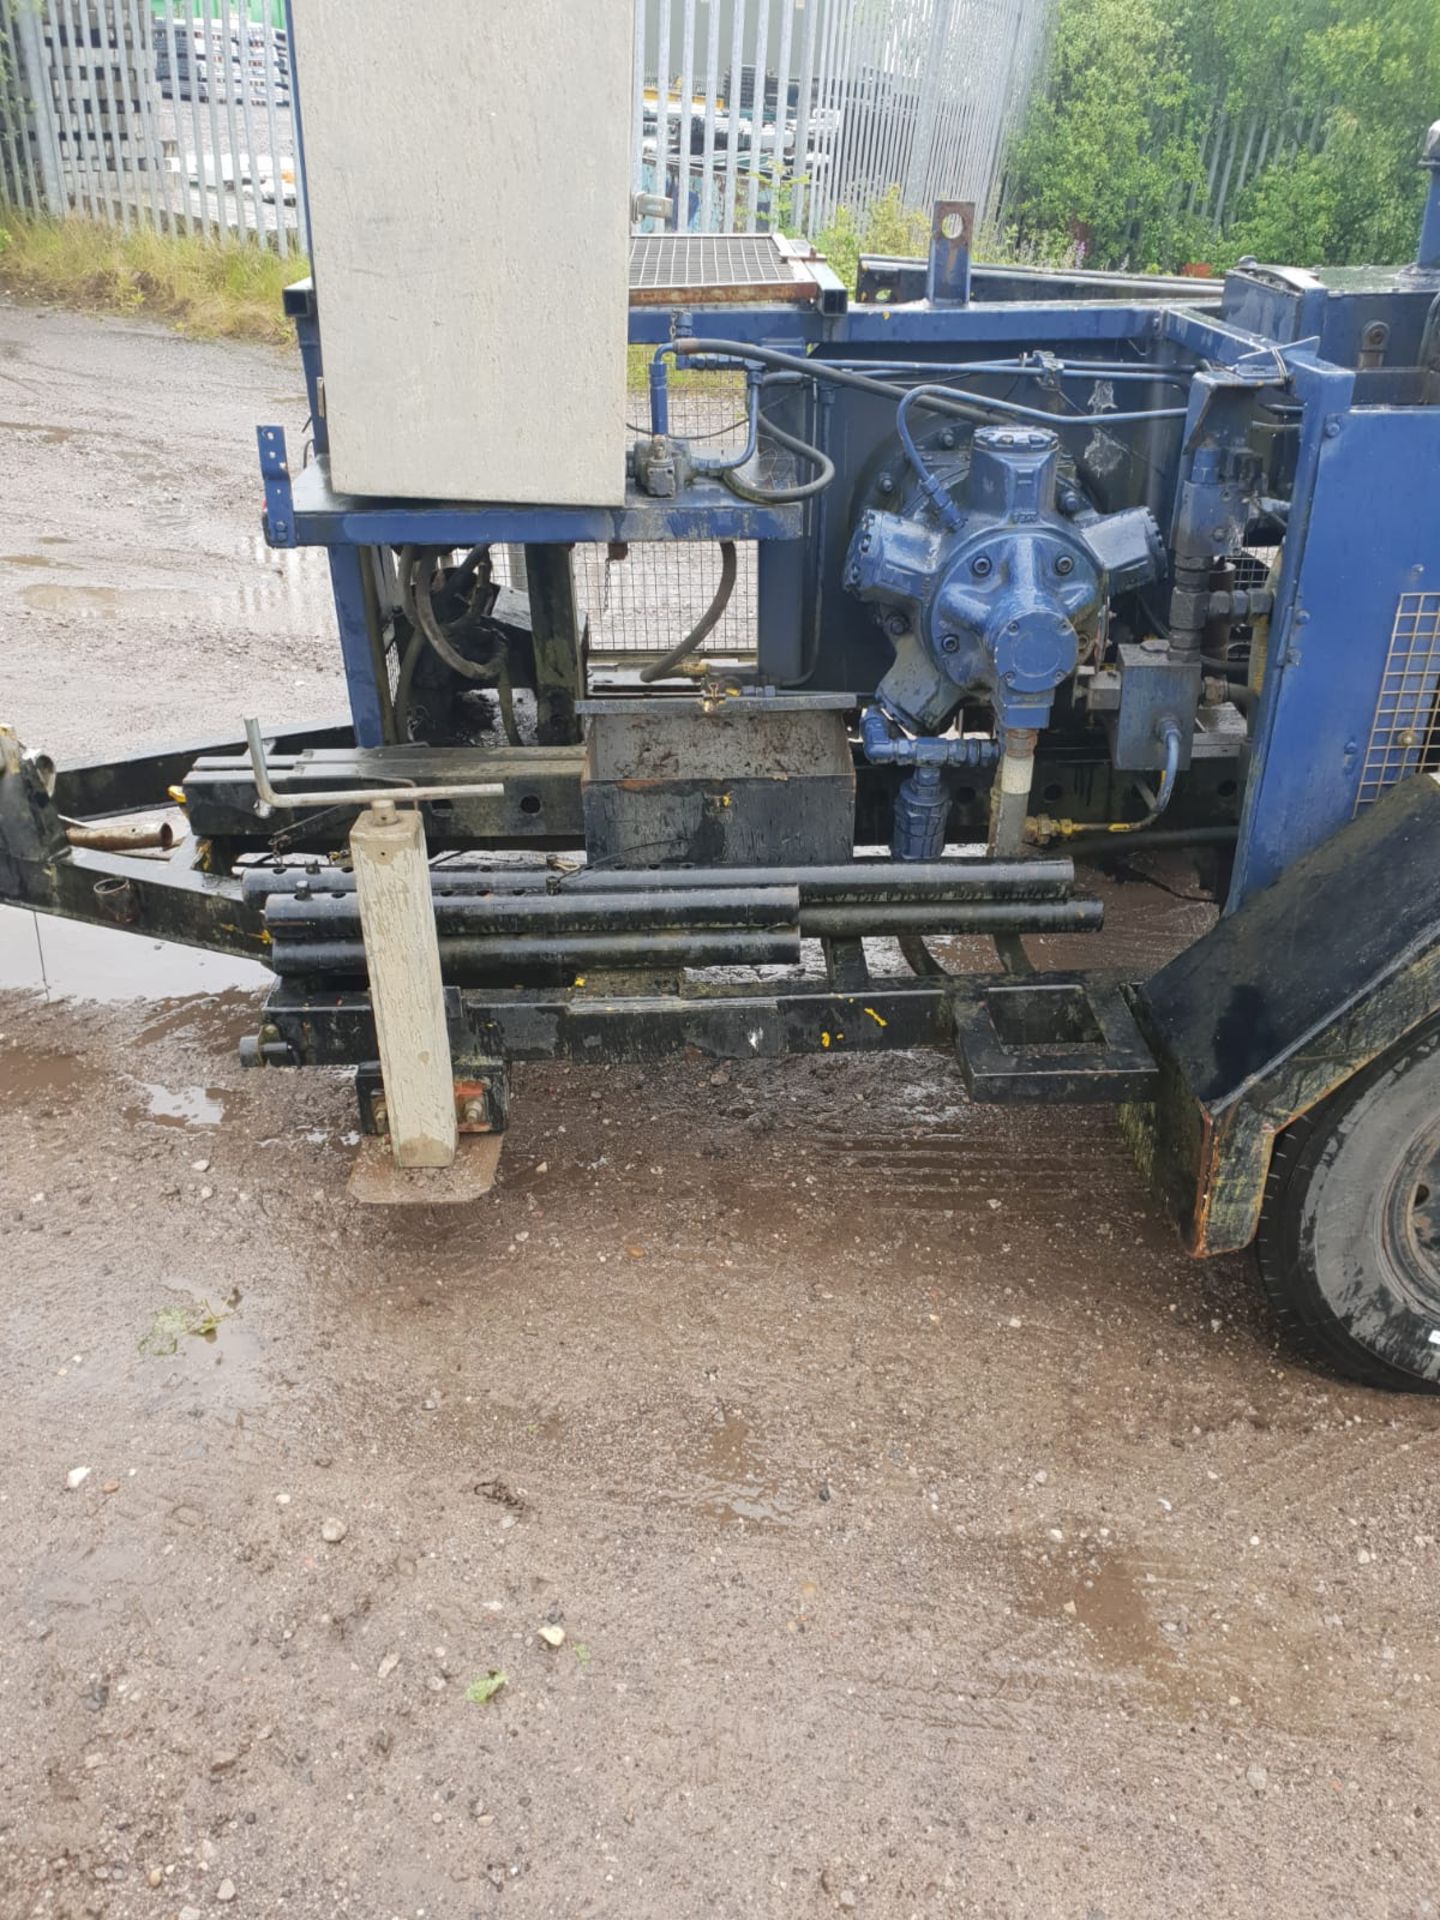 DIESEL HYDRAULIC WINCH LISTER PETTER ENGINE 2 CYLINDER, IN FULL WORKING ORDER *NO VAT* - Image 4 of 17